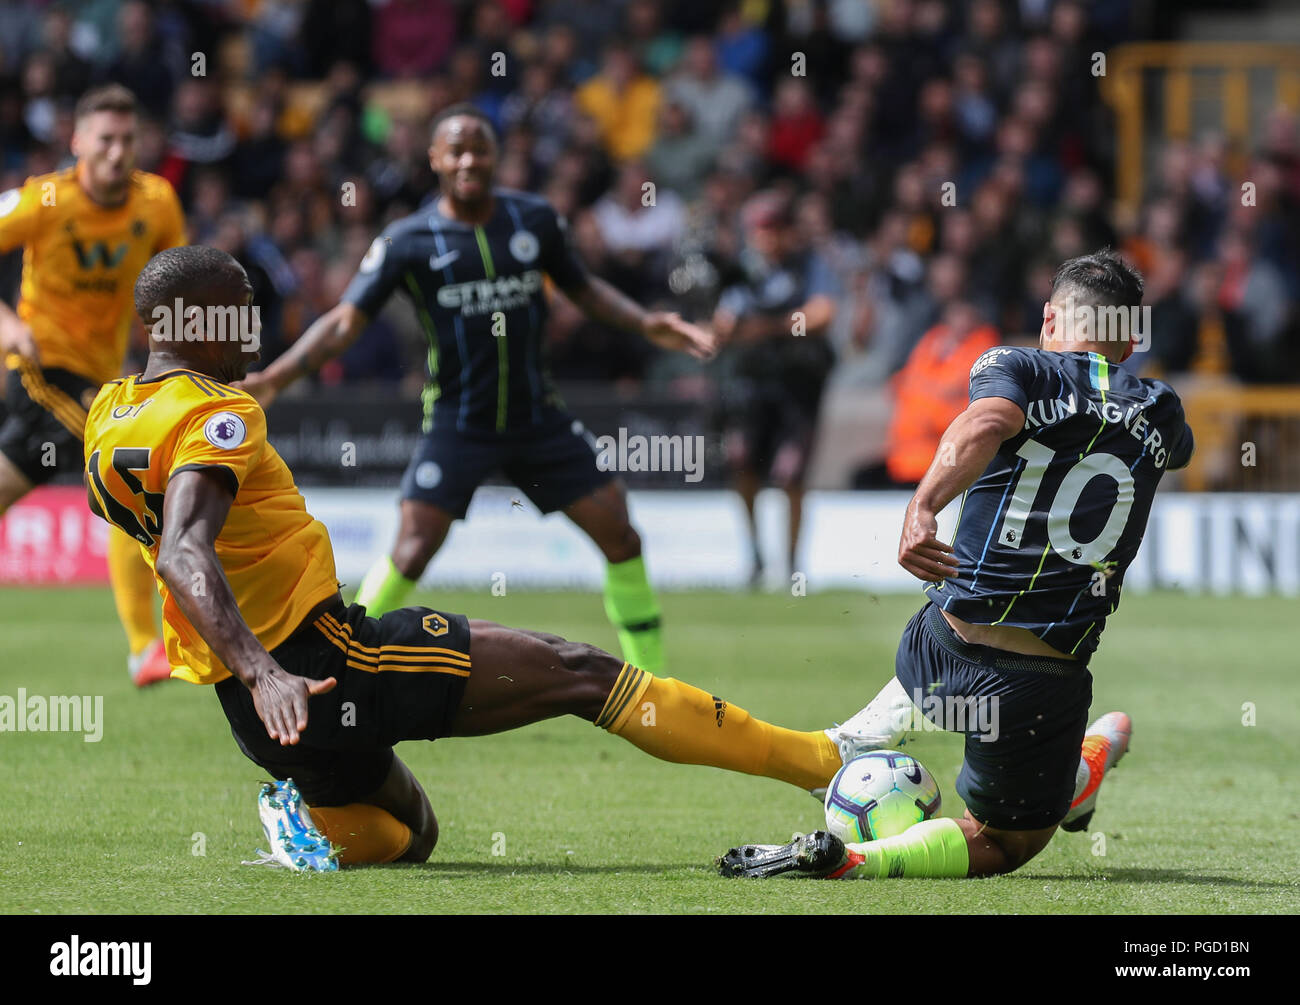 https://c8.alamy.com/comp/PGD1BN/wolverhampton-uk-25th-aug-2018-willy-boly-of-wolverhampton-wanderers-gets-in-a-last-ditch-tackle-to-dispossess-sergio-aguero-of-manchester-city-during-the-premier-league-match-between-wolverhampton-wanderers-and-manchester-city-at-molineux-on-august-25th-2018-in-wolverhampton-england-photo-by-john-rainfordphcimagescom-credit-phc-imagesalamy-live-news-PGD1BN.jpg